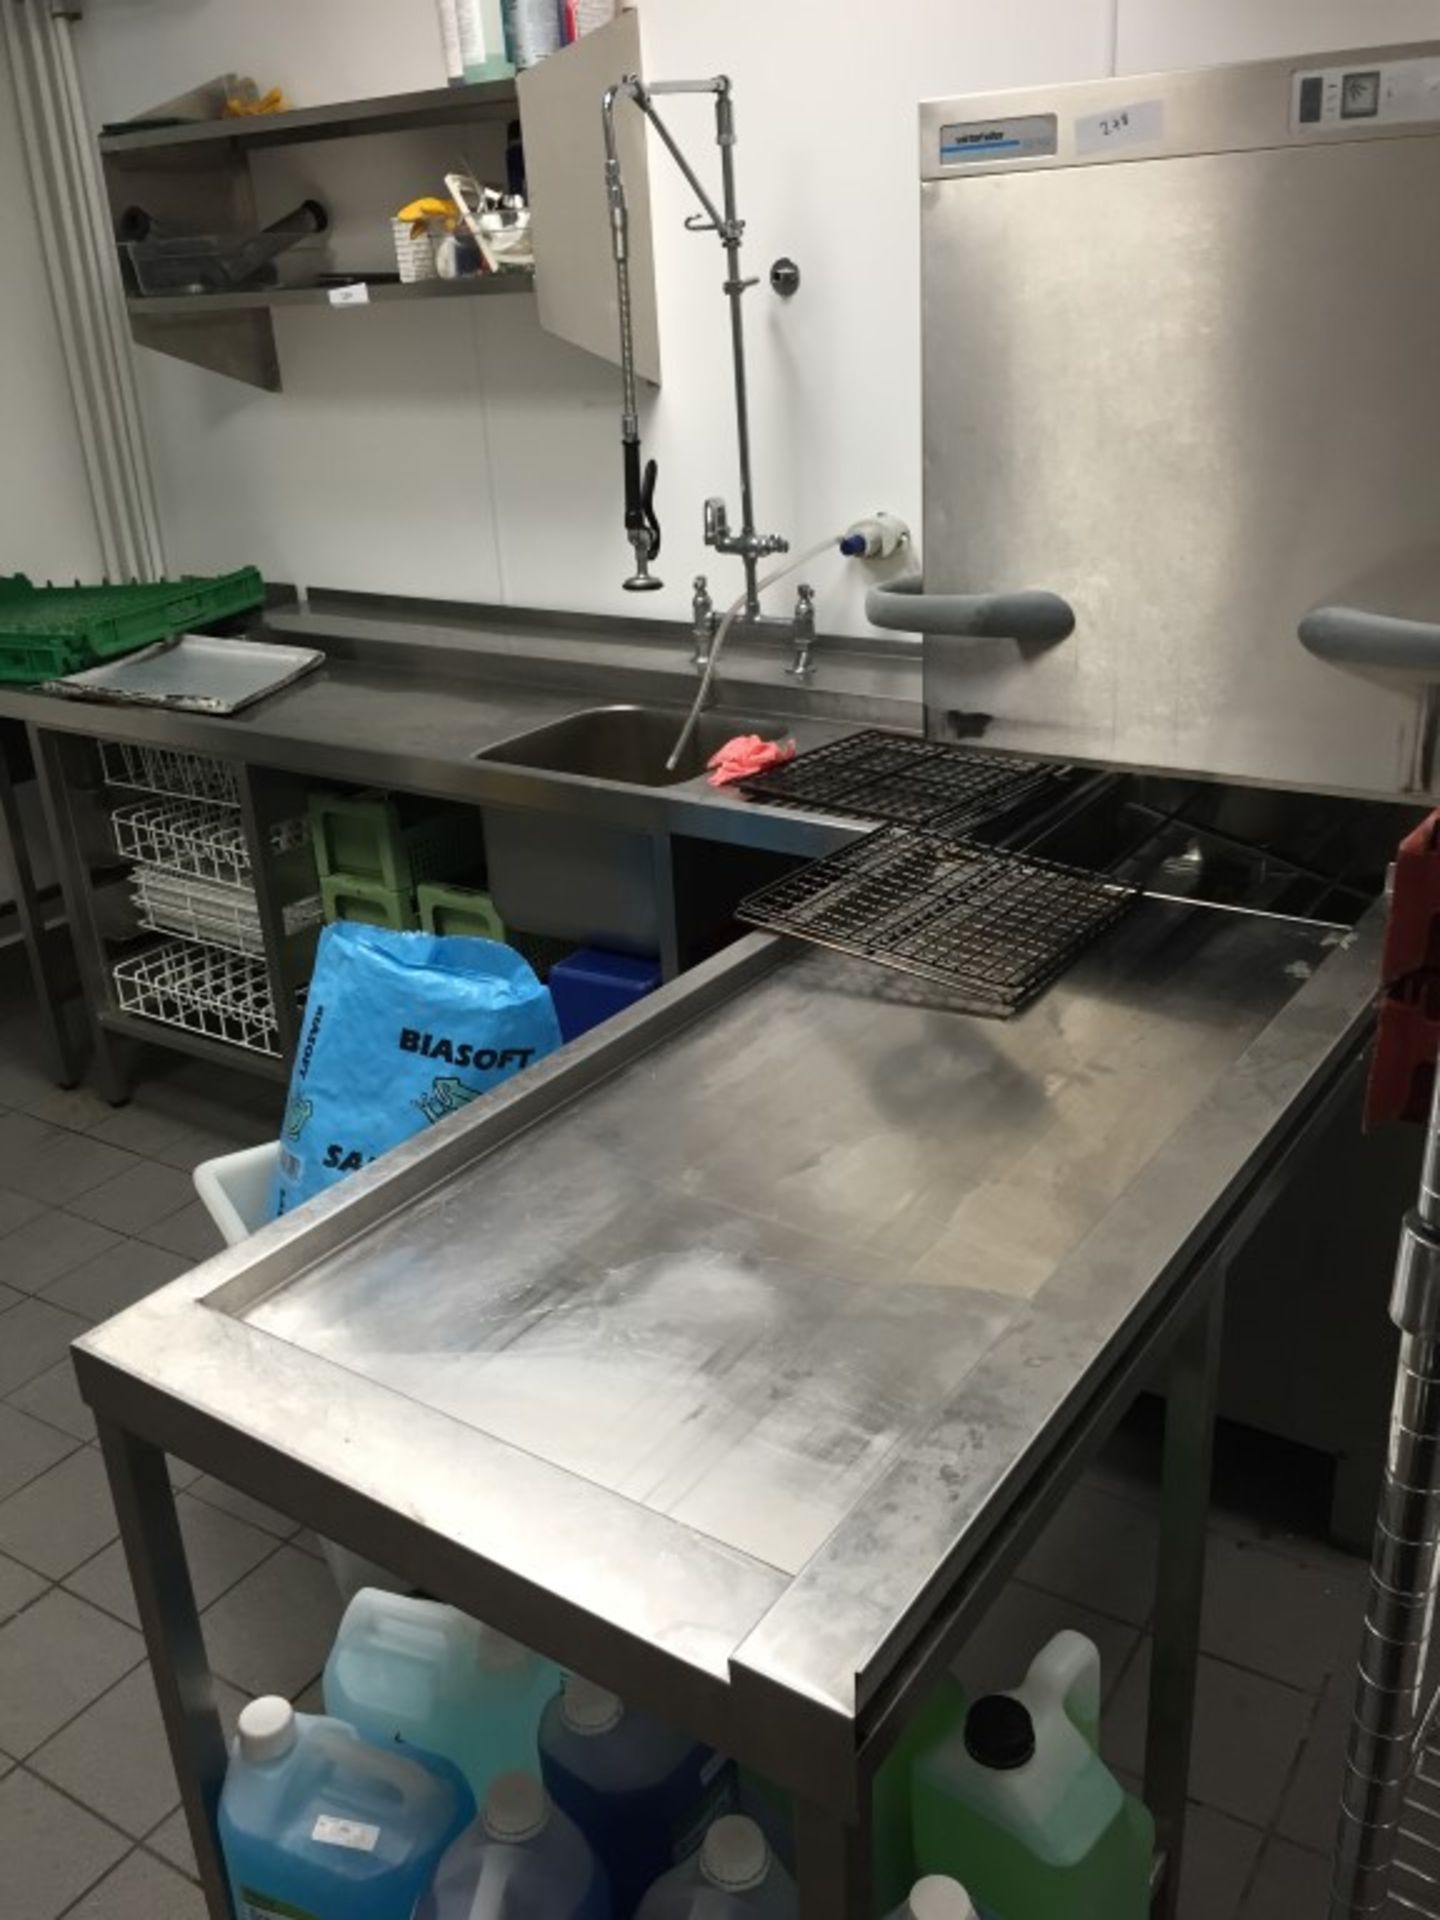 1 x Winterhalter GS502 Commercial Pass Through Dishwasher Station - Includes Stainless Steel Sink - Image 3 of 10